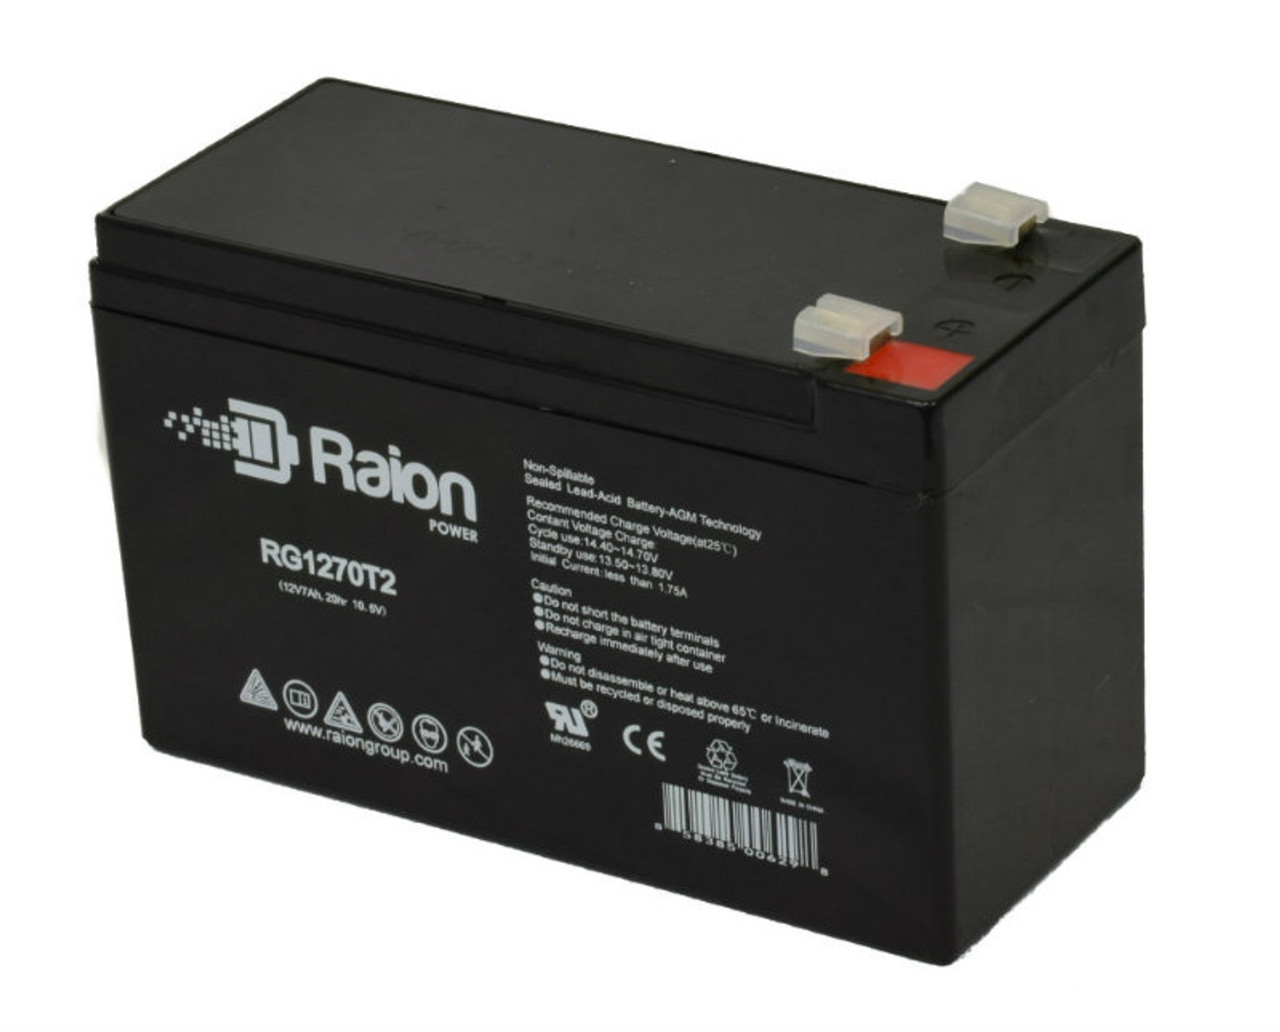 Raion Power RG1270T2 12V 7Ah Rechargeable Battery for Handicare Xclusive Stairlift